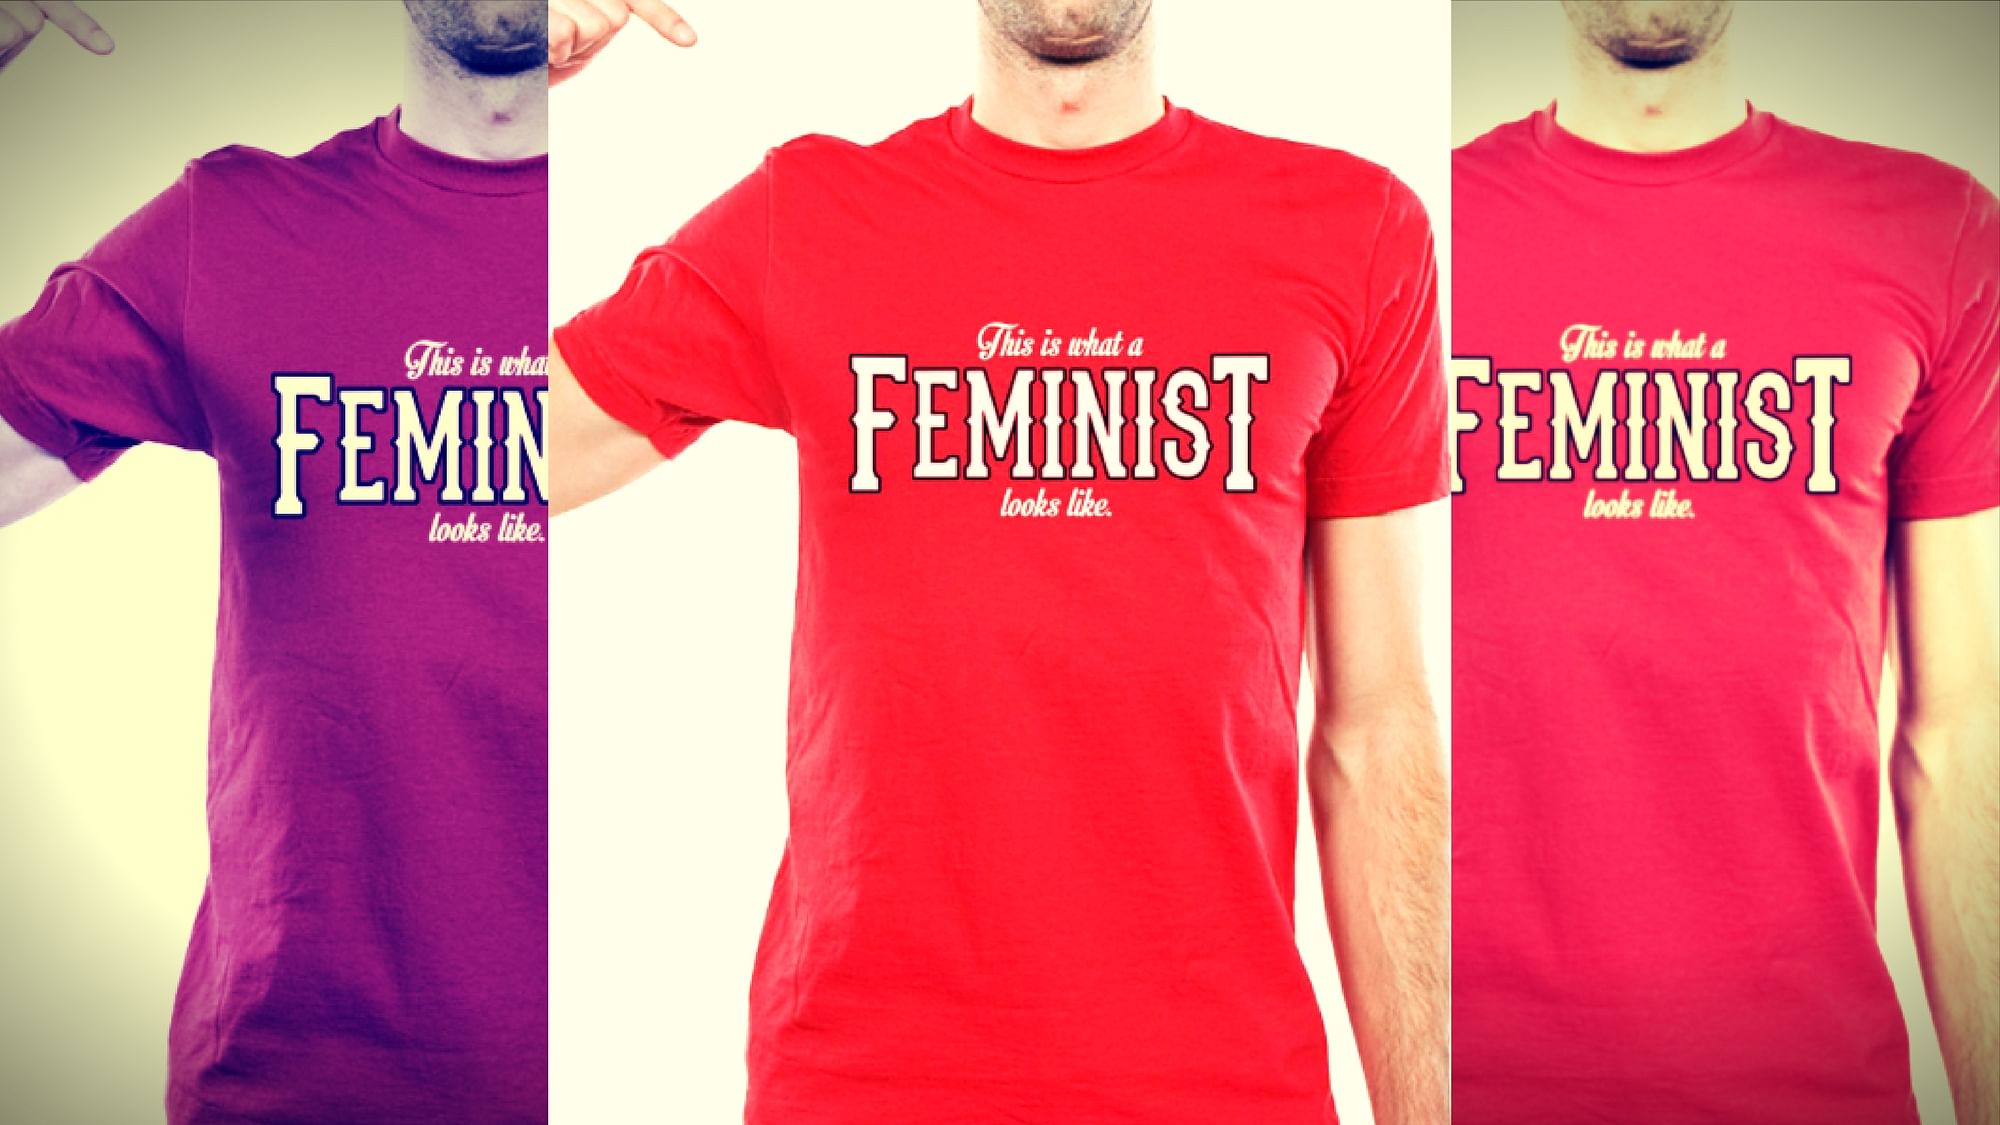 The co-optation of feminism by agenda-driven people needs to stop. (Photo Courtesy: <a href="http://hereticwear.com/wp-content/uploads/2013/05/Feminist-T-shirt-Men-Red.jpg">hereticwear.com</a>/Image altered by <b>The Quint</b>)